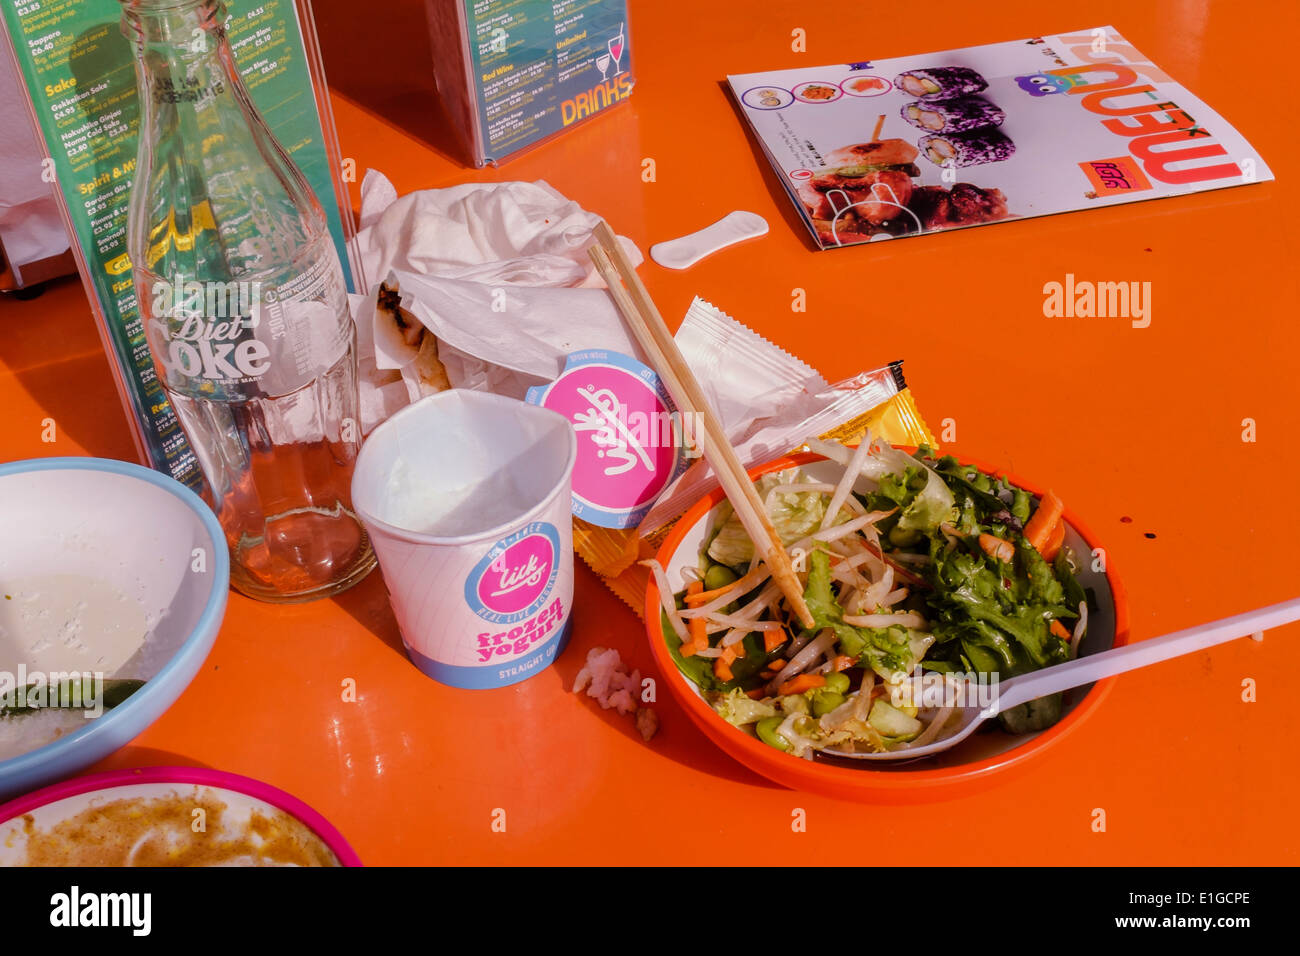 Food waste at fast food outlet. London, UK Stock Photo